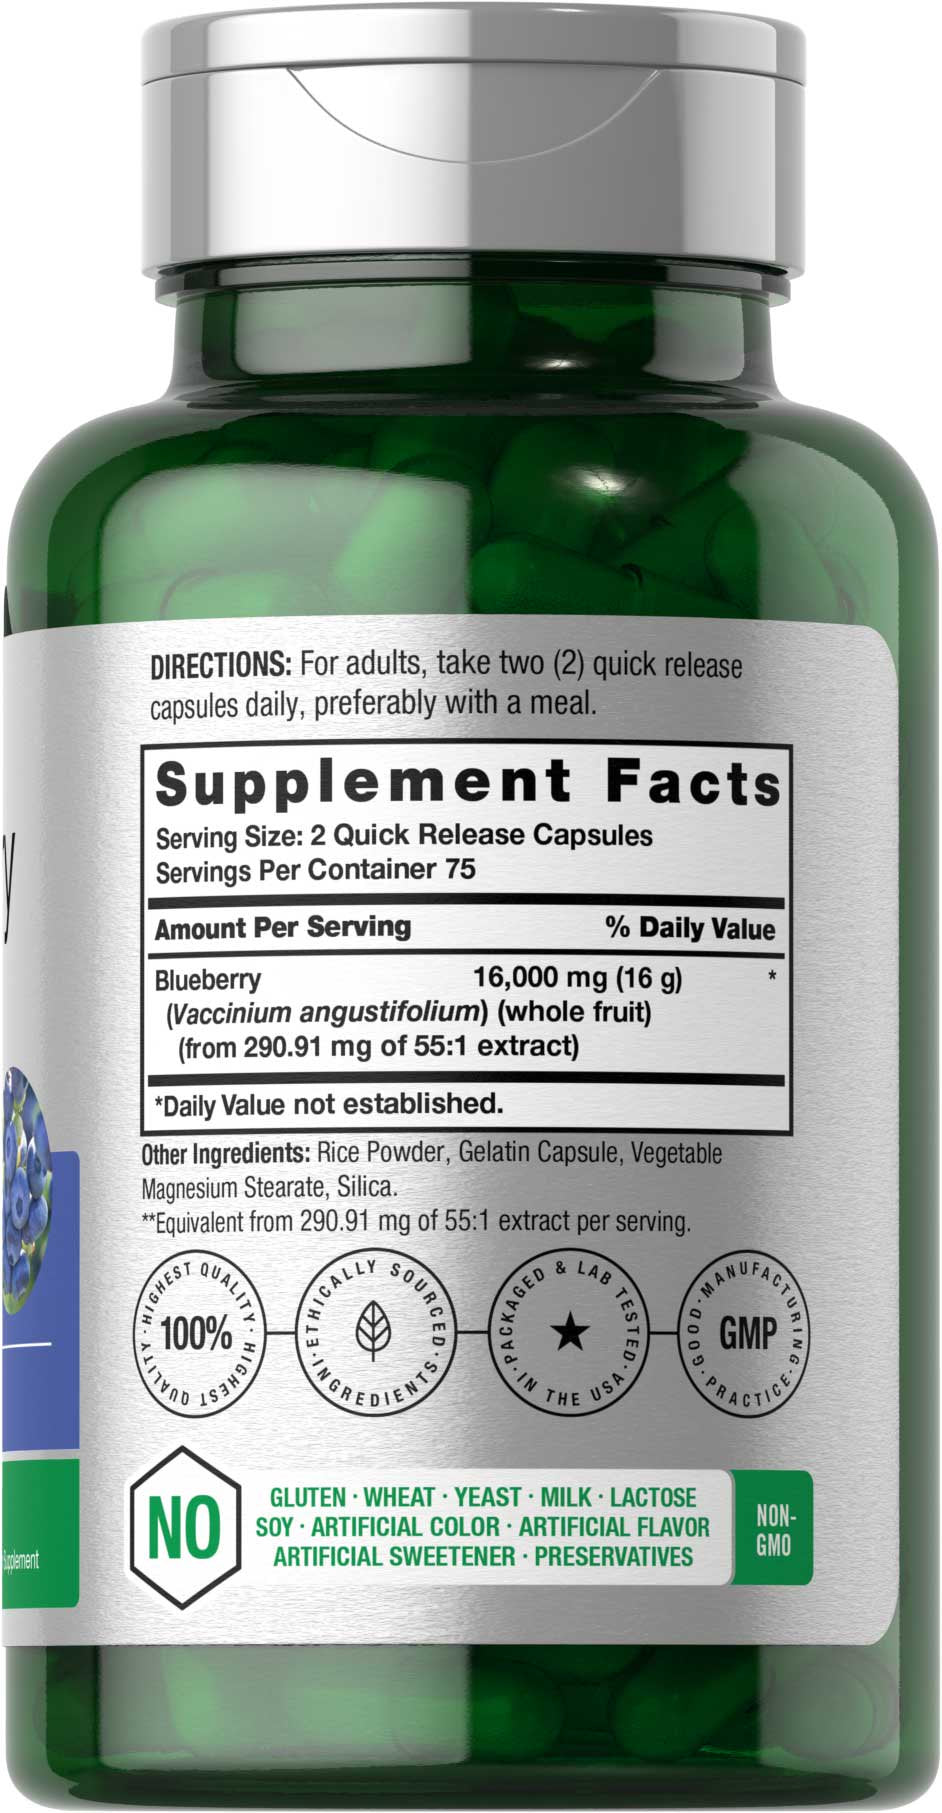 Blueberry Extract 16000Mg | 150 Capsules | by Horbaach